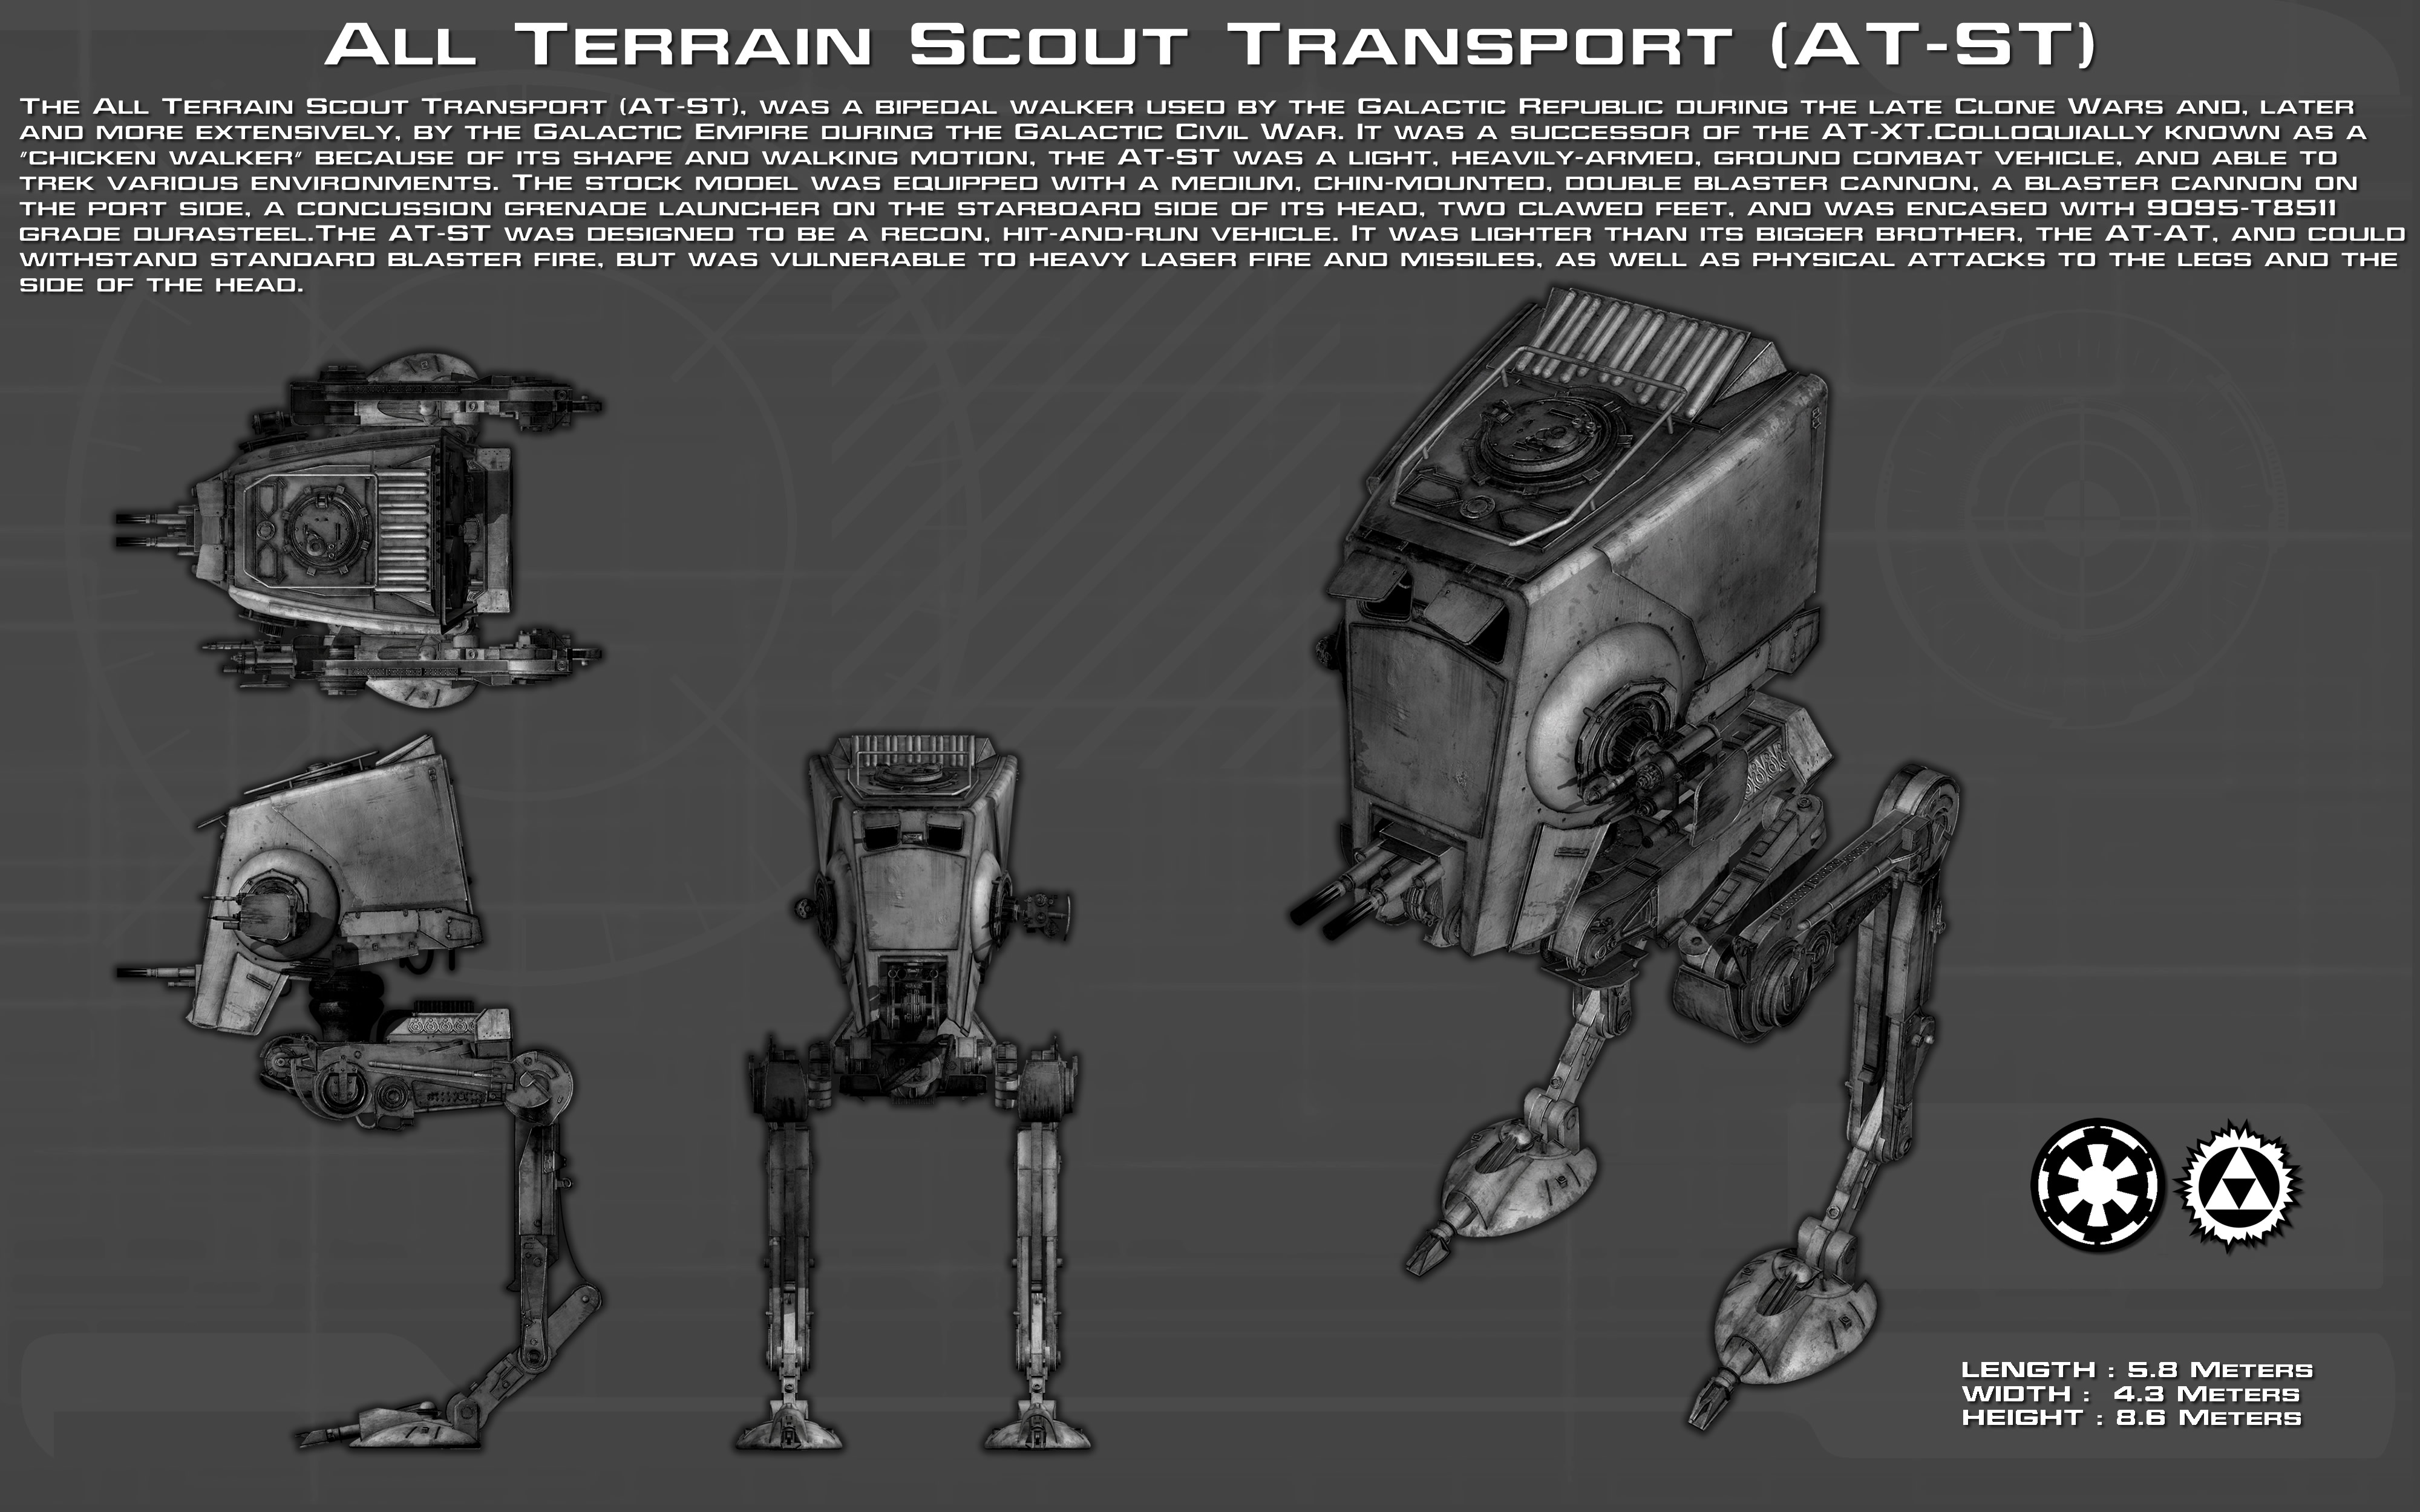 All Terrain-Scout Transport ortho [New] by unusualsuspex on DeviantArt